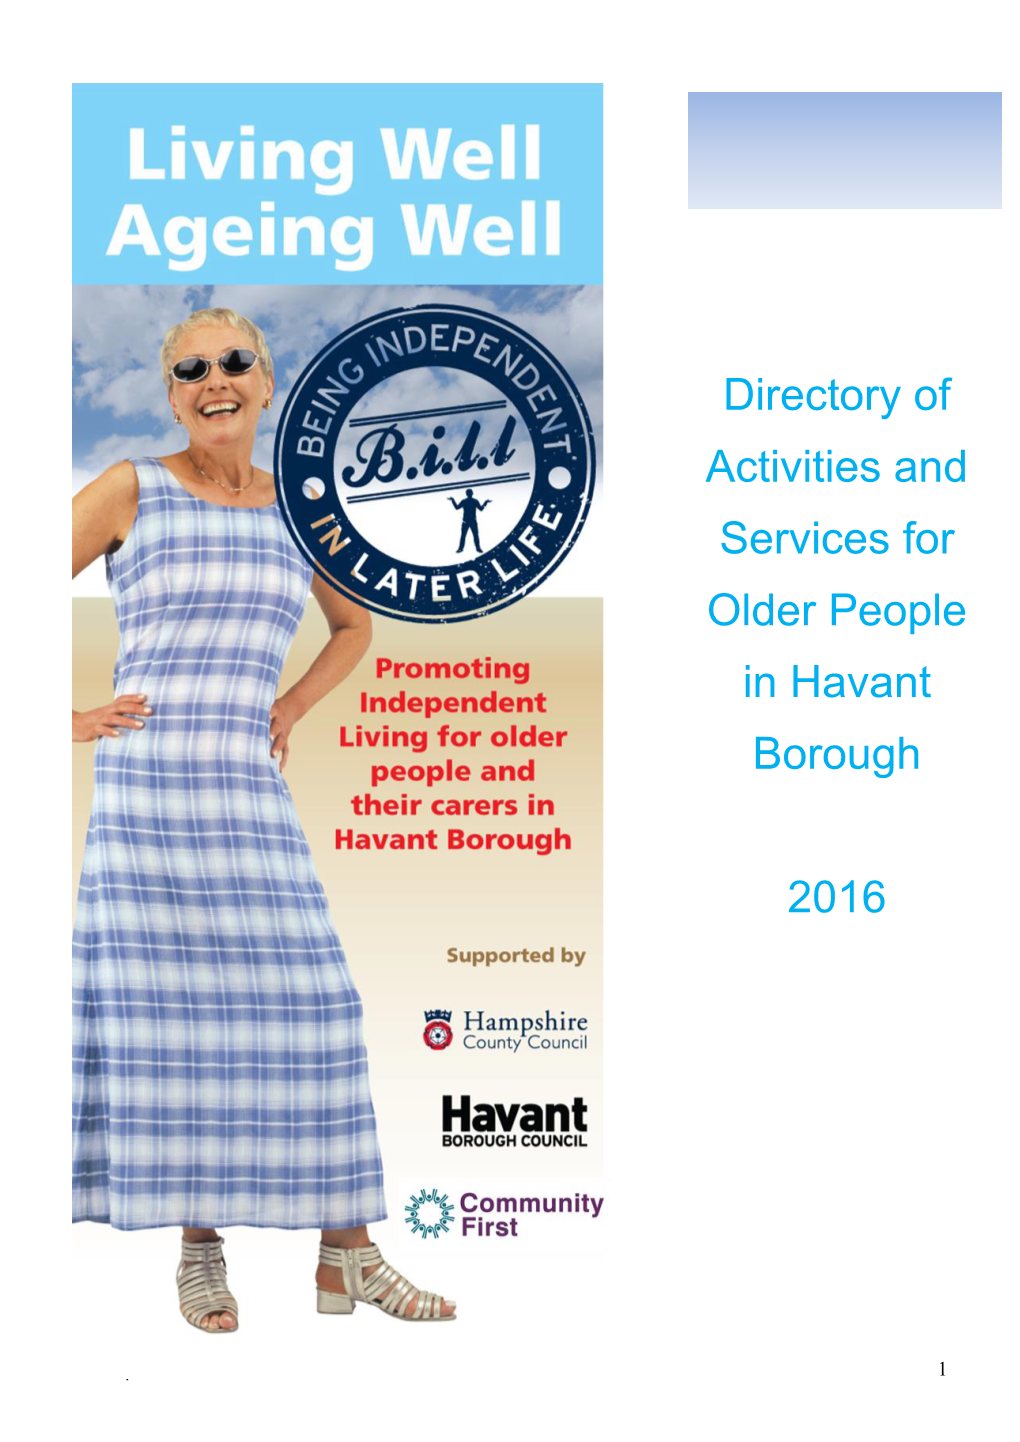 Directory of Activities and Services for Older People in Havant Borough 2016